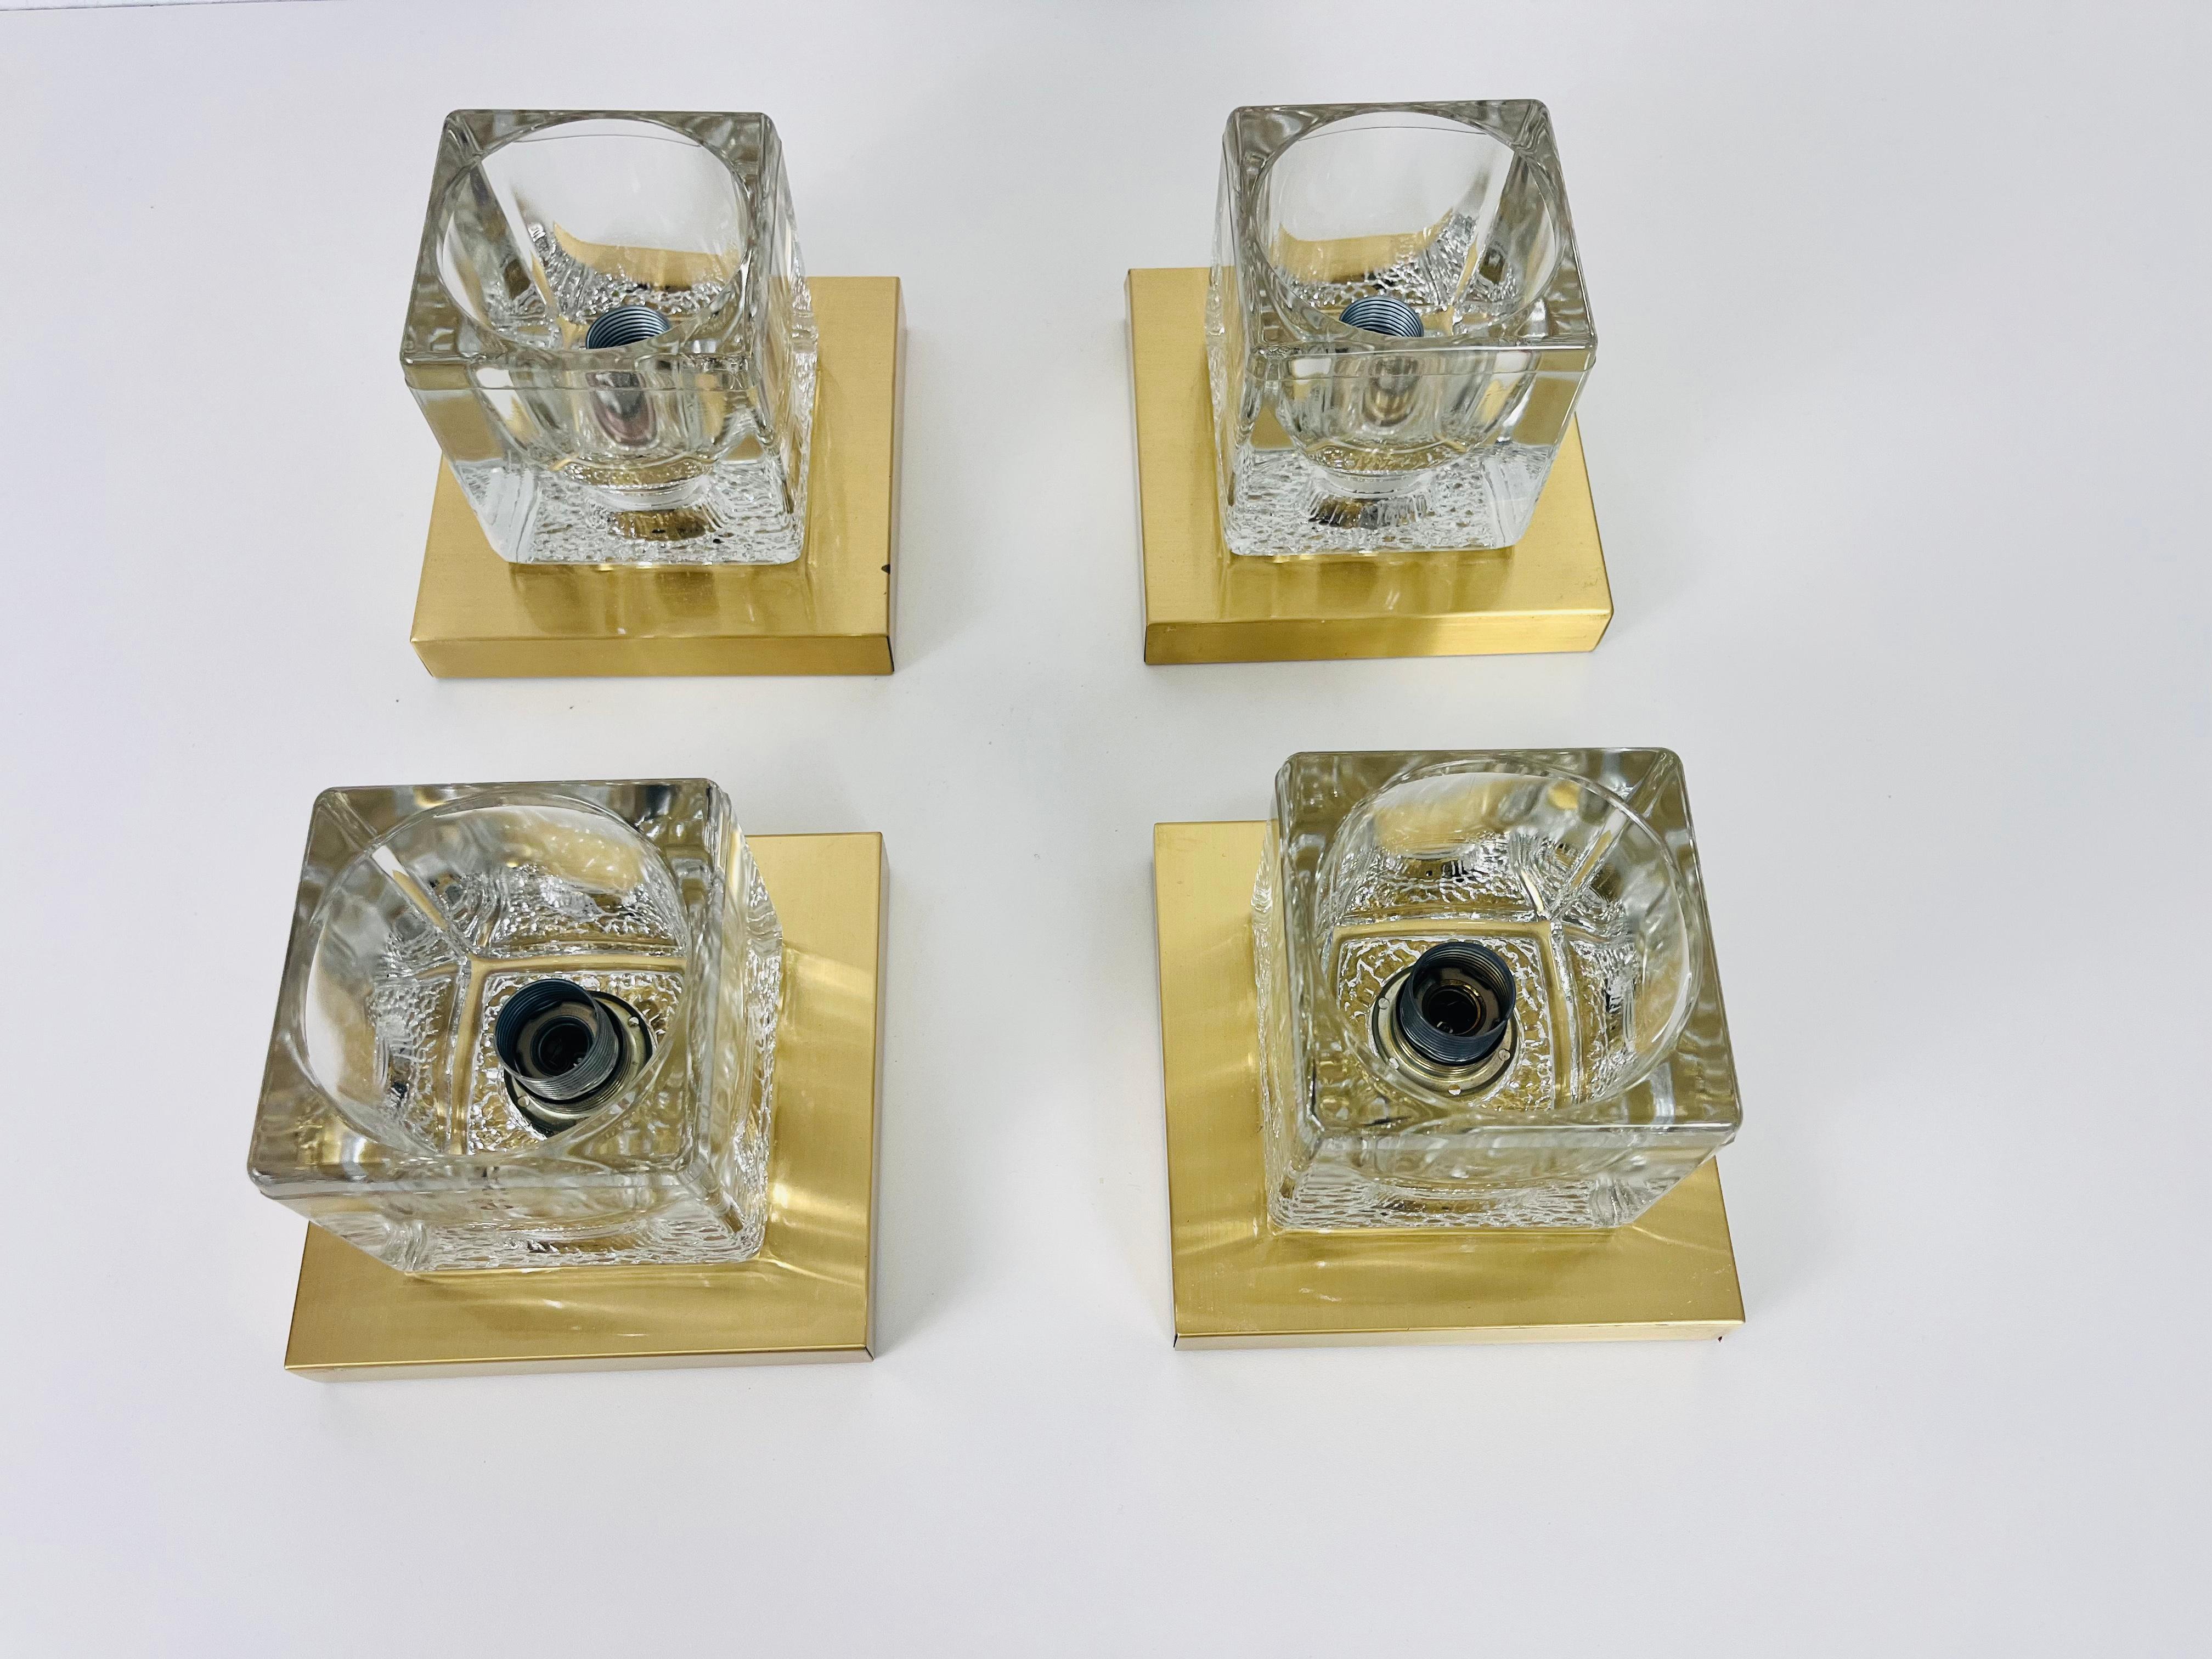 A beautiful set of wall lamps by Peill & Putzler made in Germany in the 1970s. They have a cube shape and are made of transparent ice glass with a brass base. The lightings can also used as flushmounts or table lamps. They are in very good vintage